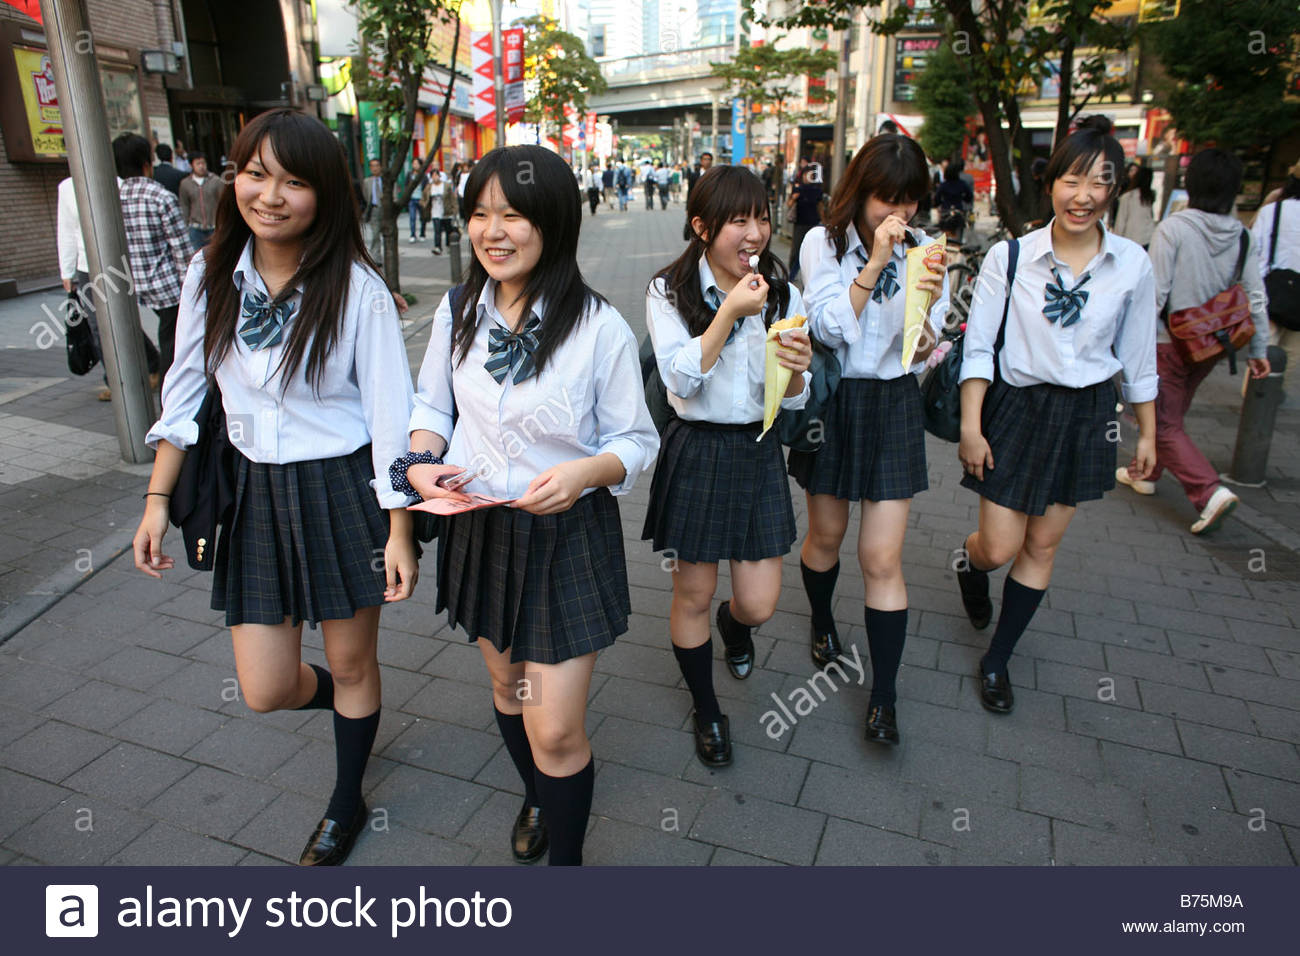 japanese-student-on-her-way-to-school-in-tokyo-japan-B75M9A.jpg